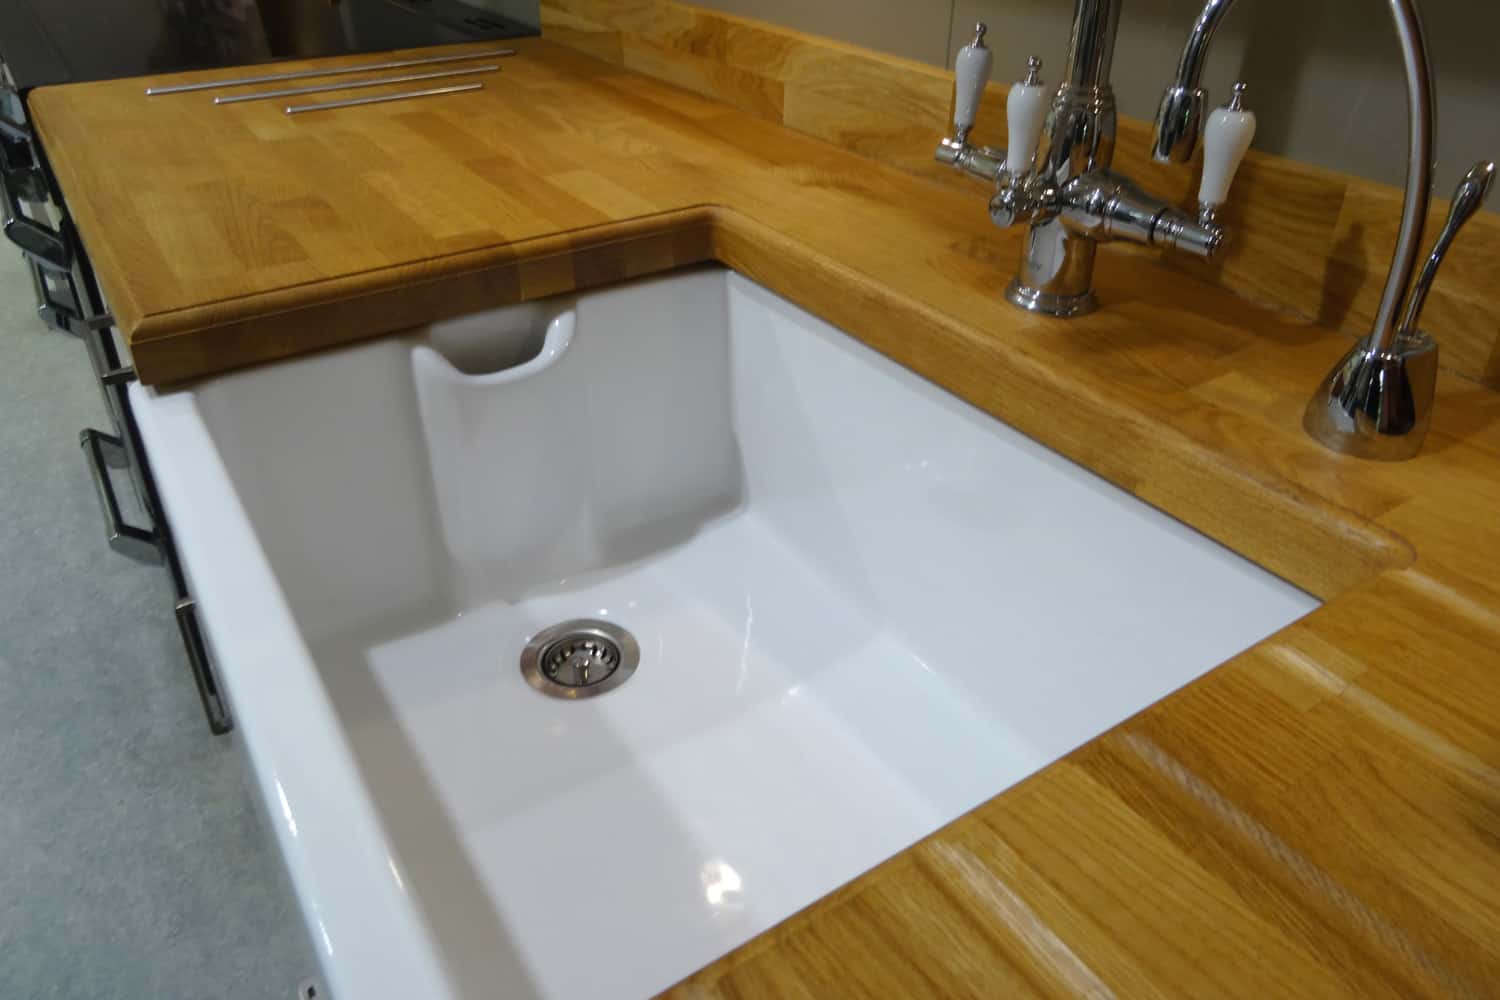 Photo showing a white ceramic Belfast butler sink with chrome mixed taps. The sink is part of a fitted kitchen, surrounded by a real wooden kitchen worktop.